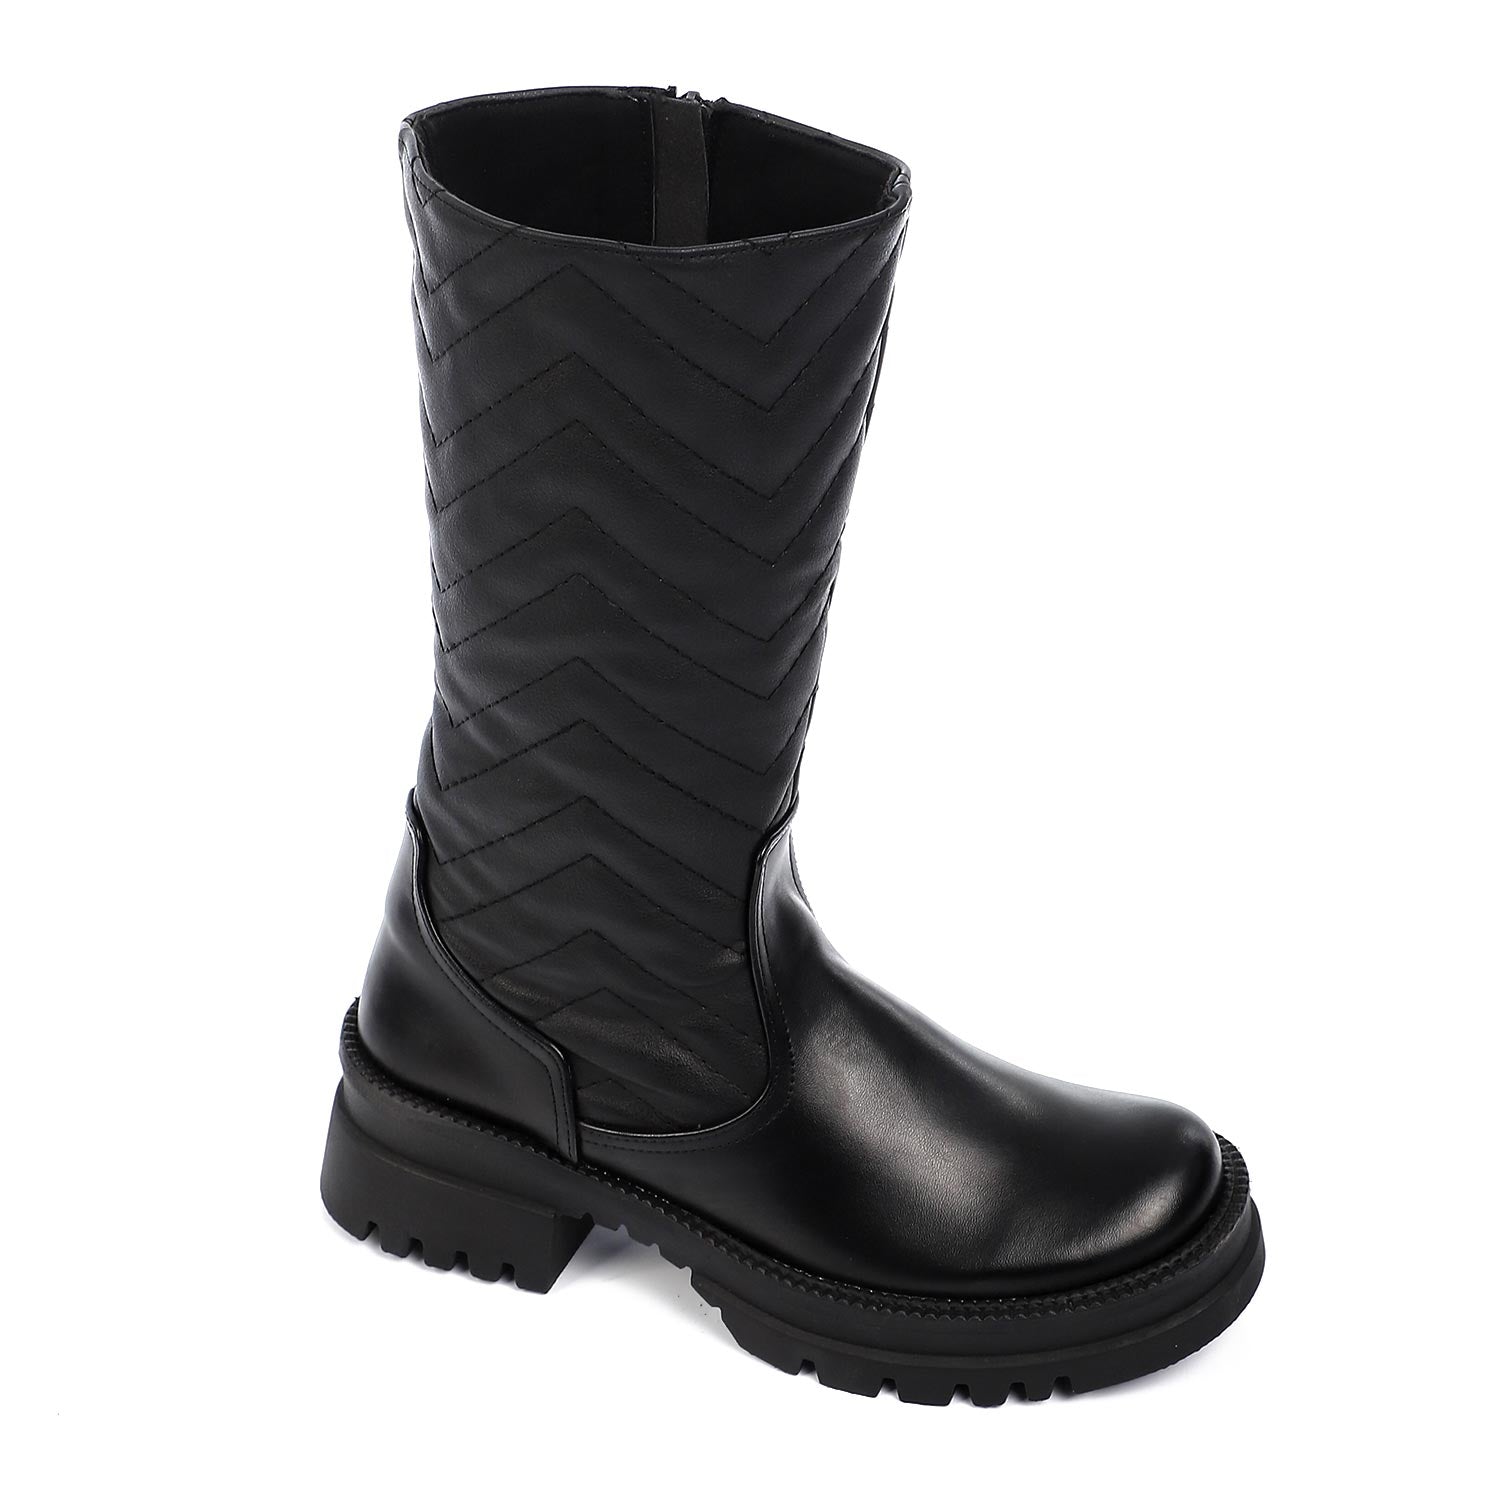 Mr Joe Quilted Leather Zipper Mid Calf Boots